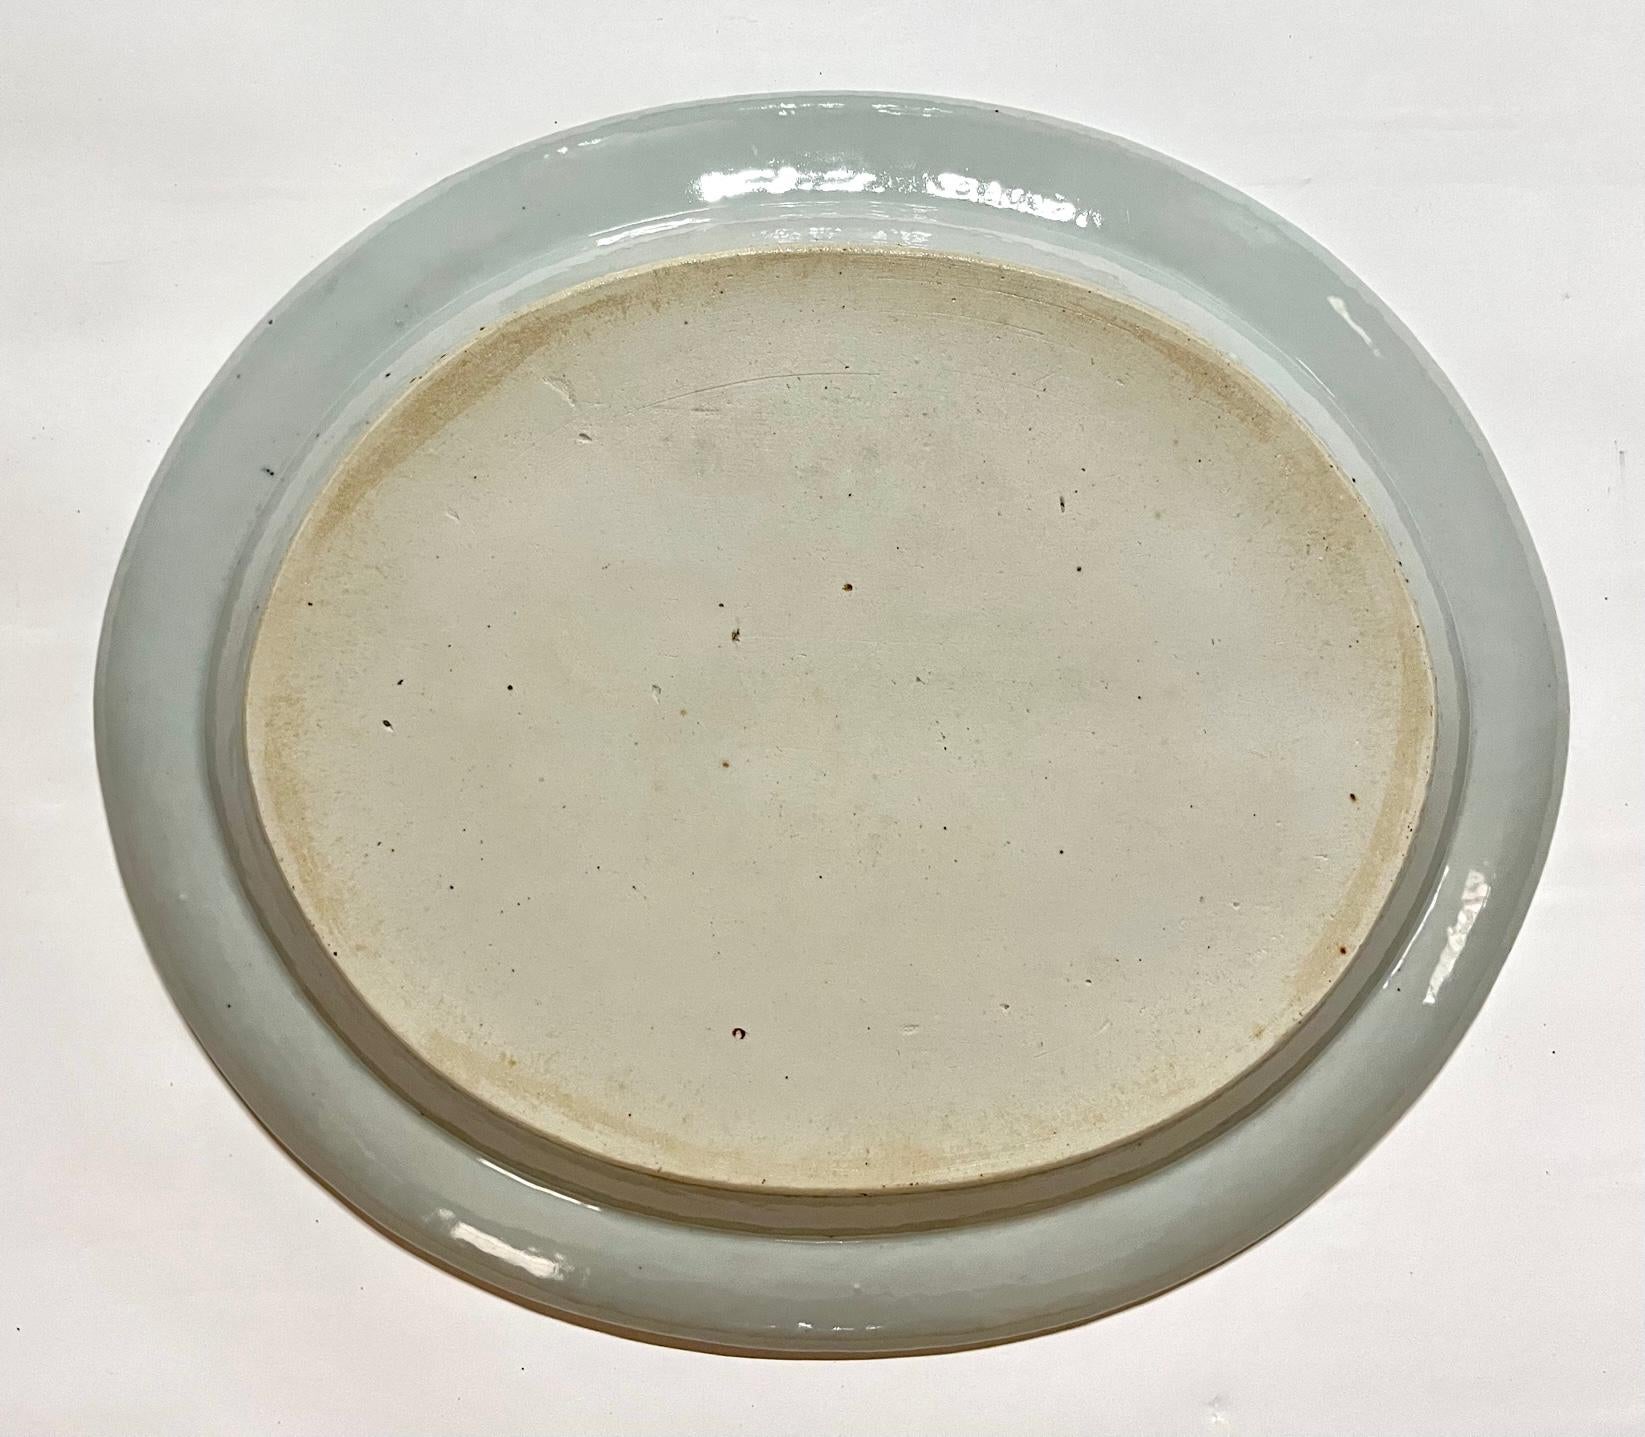 Chinese Export 'Blue Fitzhugh' Platters from the Cabot-Perkins Service, c. 1812 For Sale 4